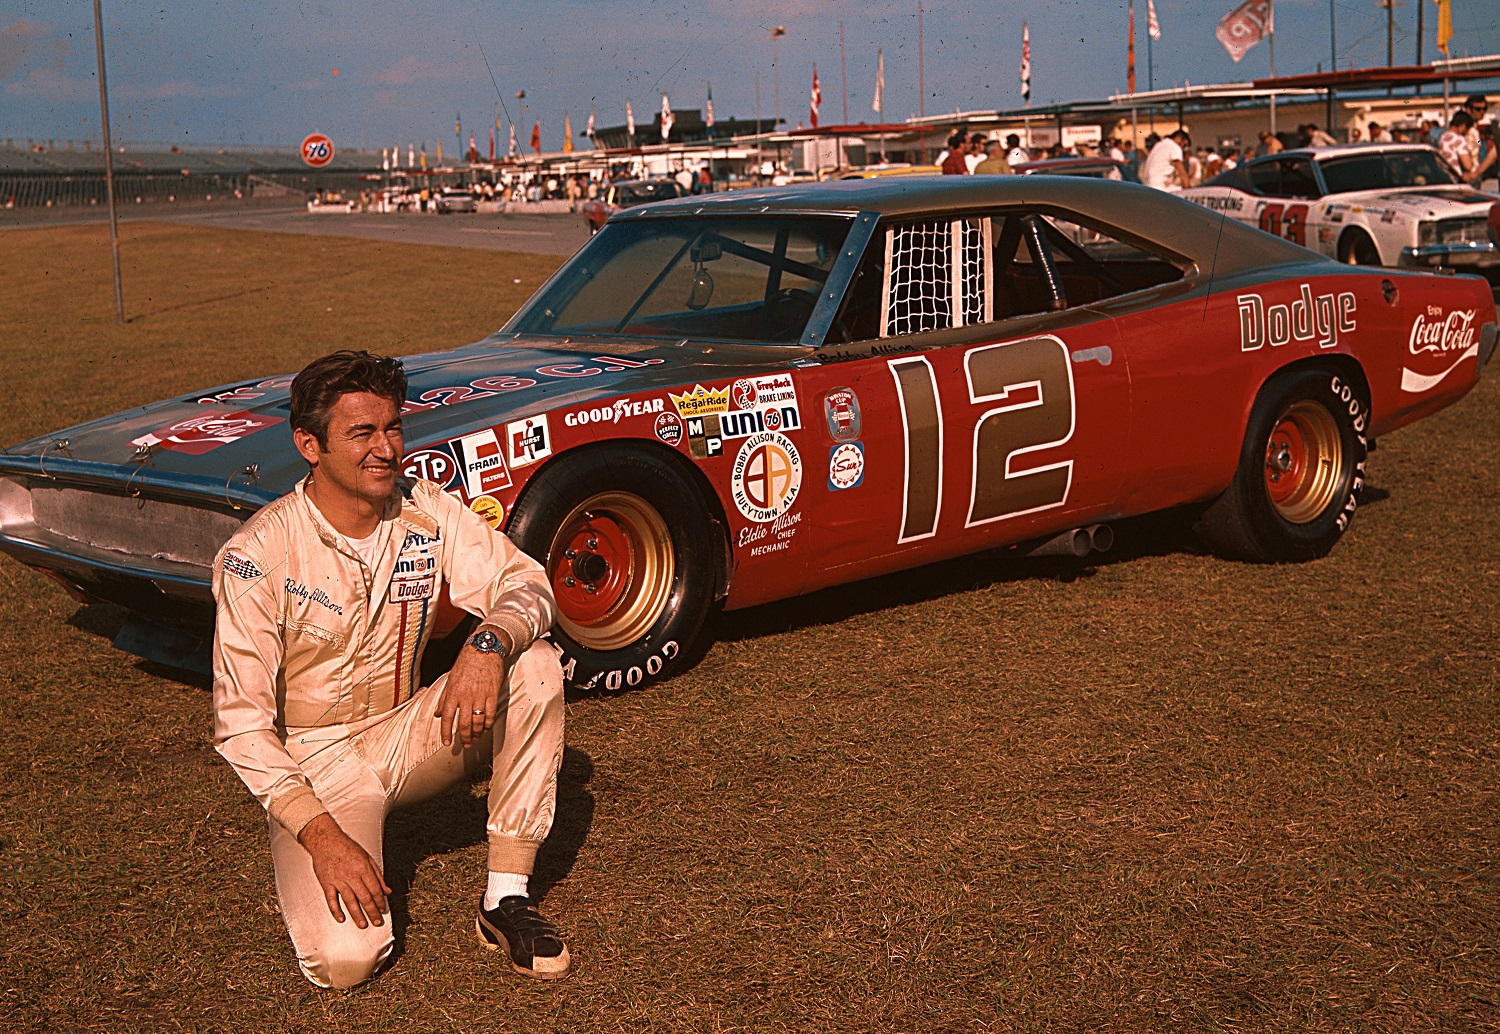 Bobby Allison brought his Dodge Charger to Daytona International Speedway for the 1971 Daytona 500. | ISC Images & Archives via Getty Images